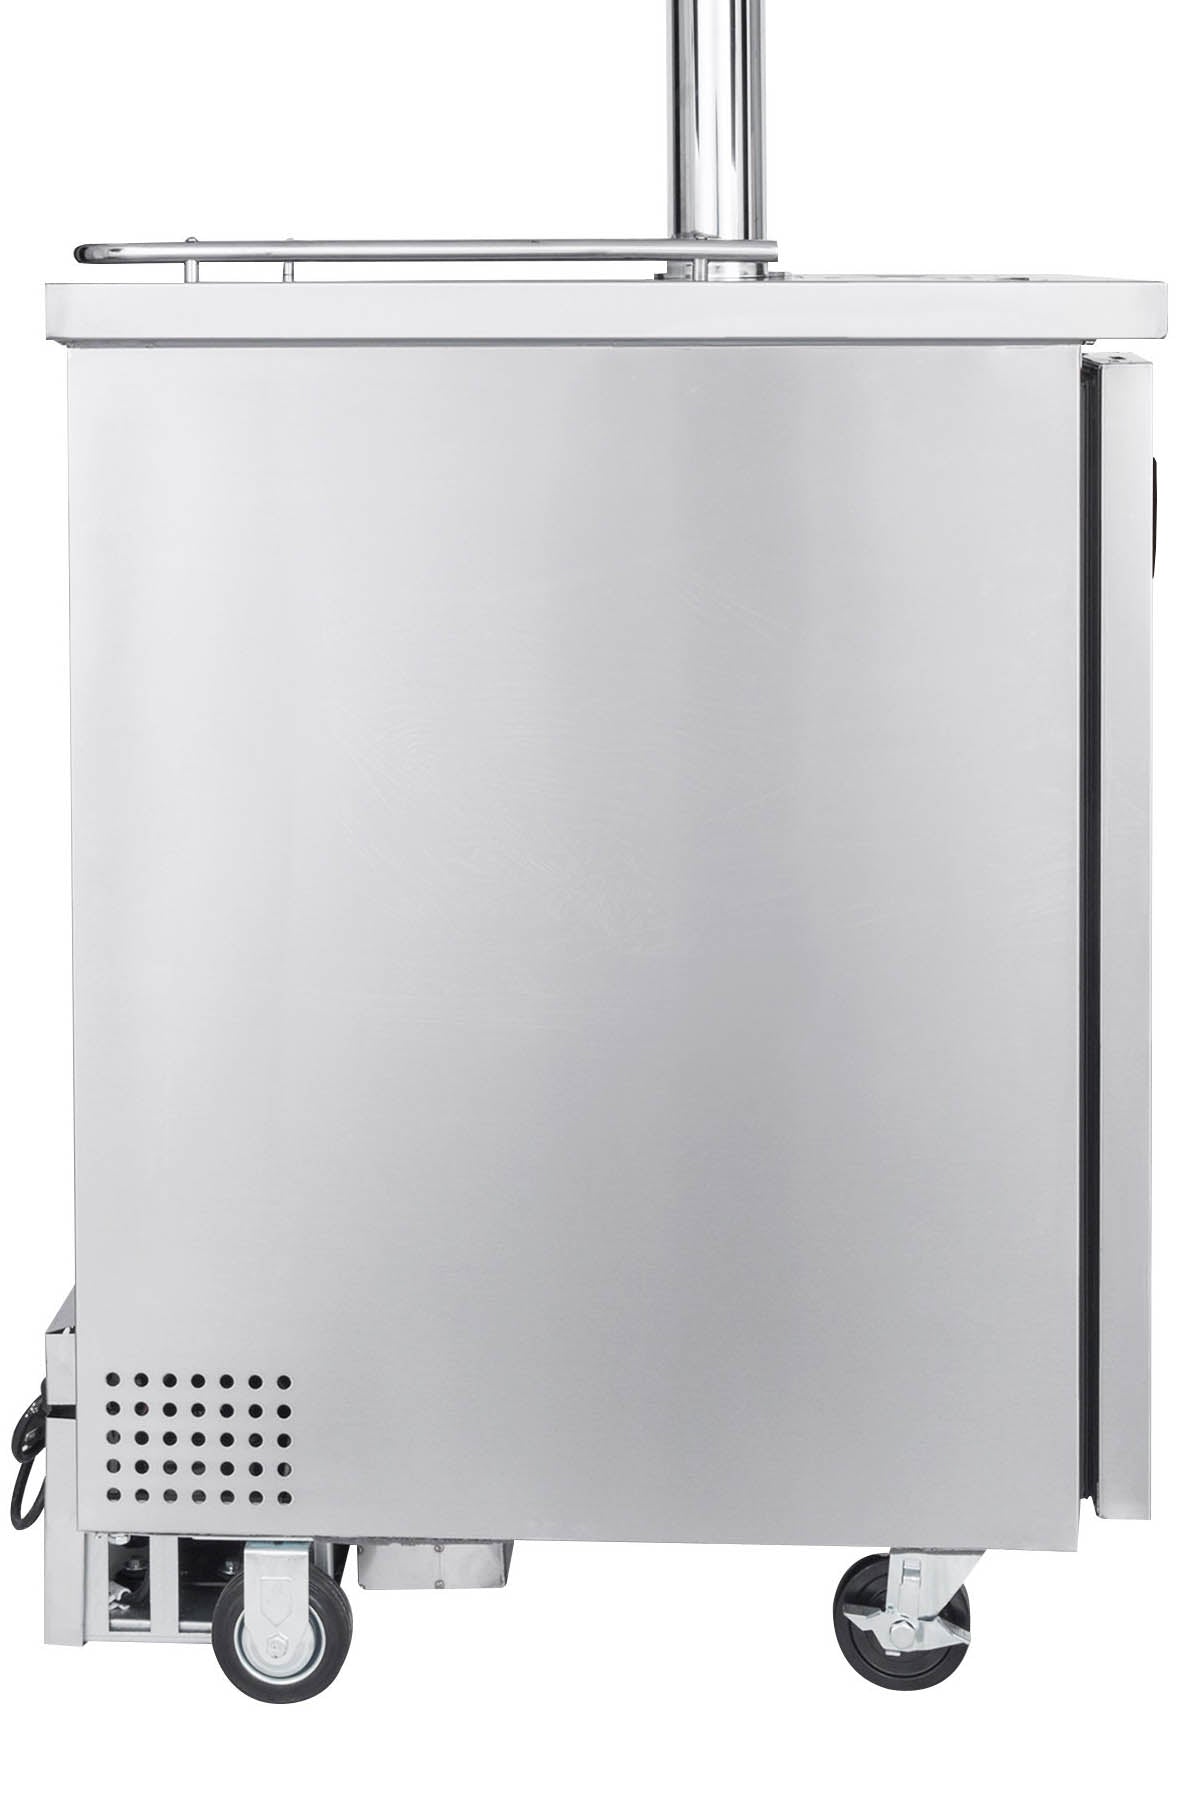 Kegco 24" Wide Homebrew Four Tap All Stainless Steel Commercial Kegerator with Kegs HBK1XS-4K-Kegerators-The Wine Cooler Club